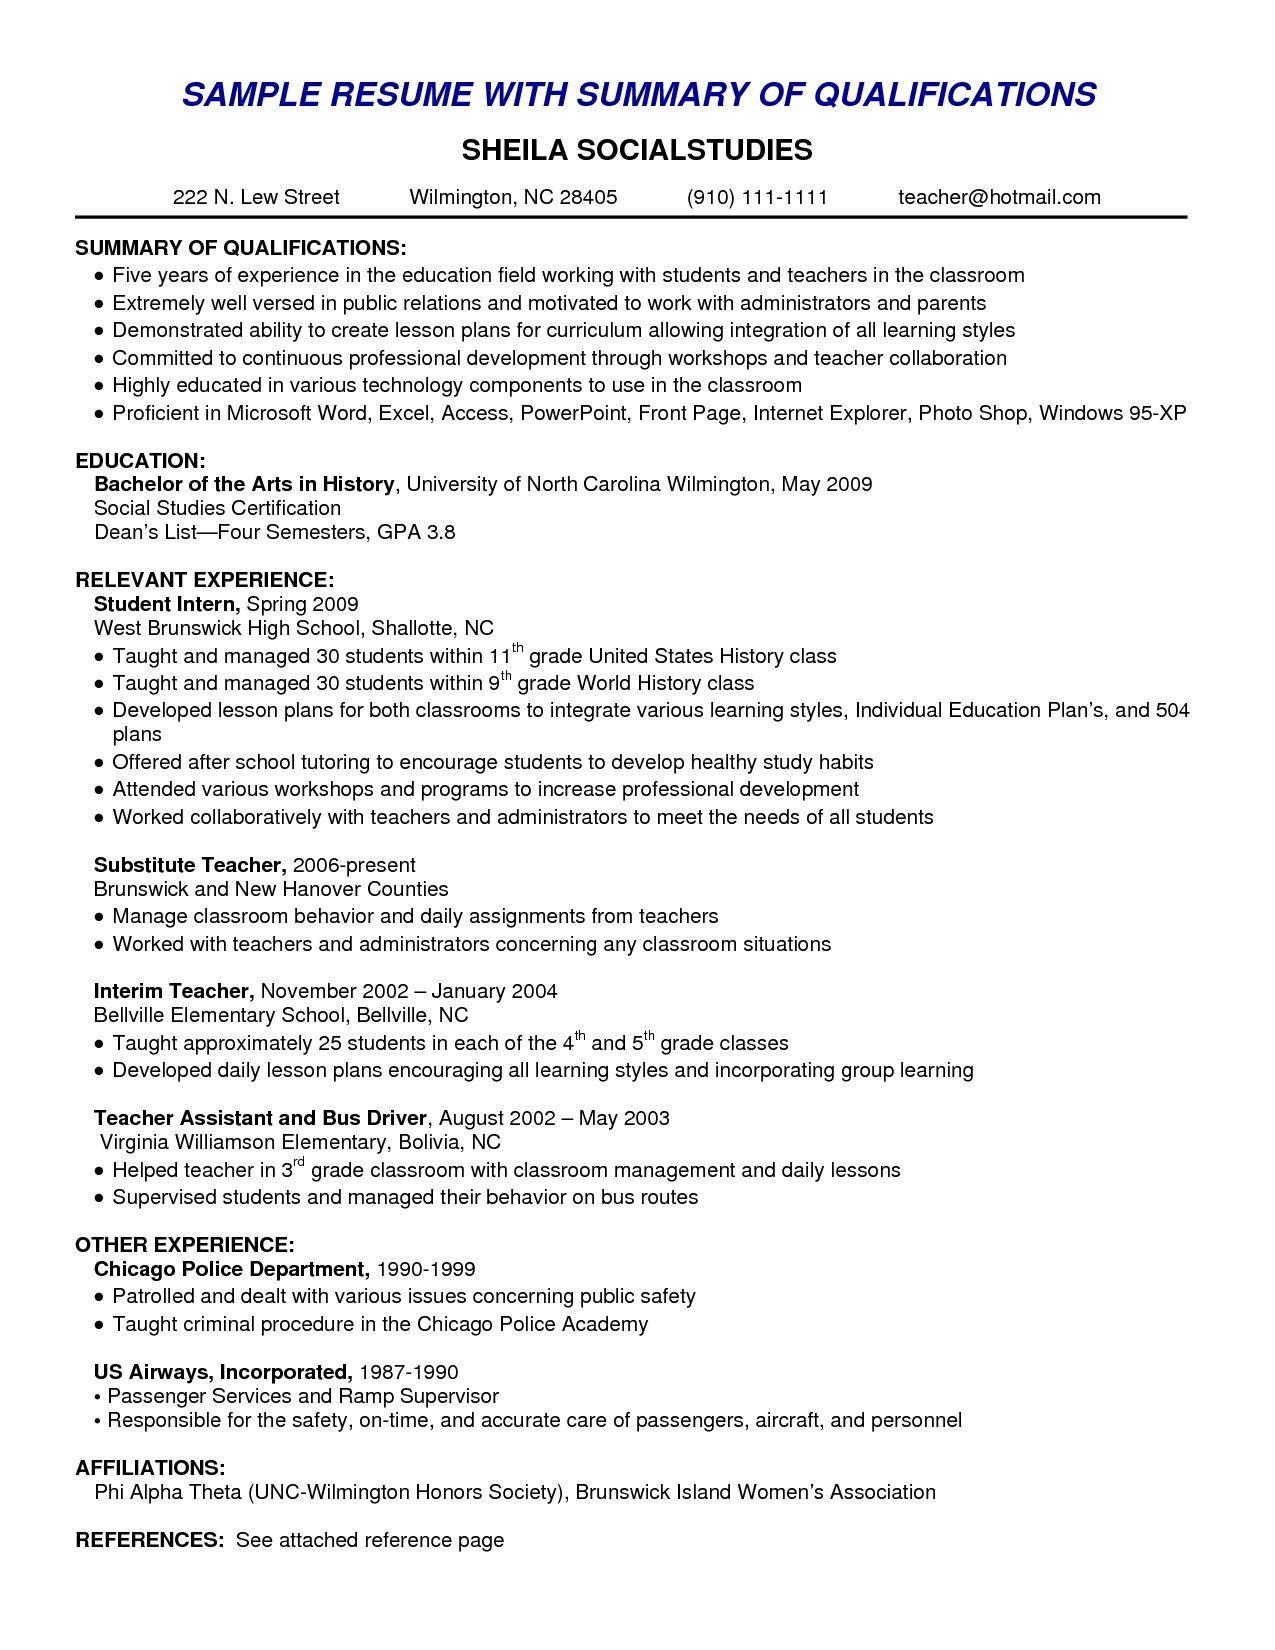 Sample Resume with Summary Of Qualifications format On A Resume What Does Sumary Of Qualifications Mean